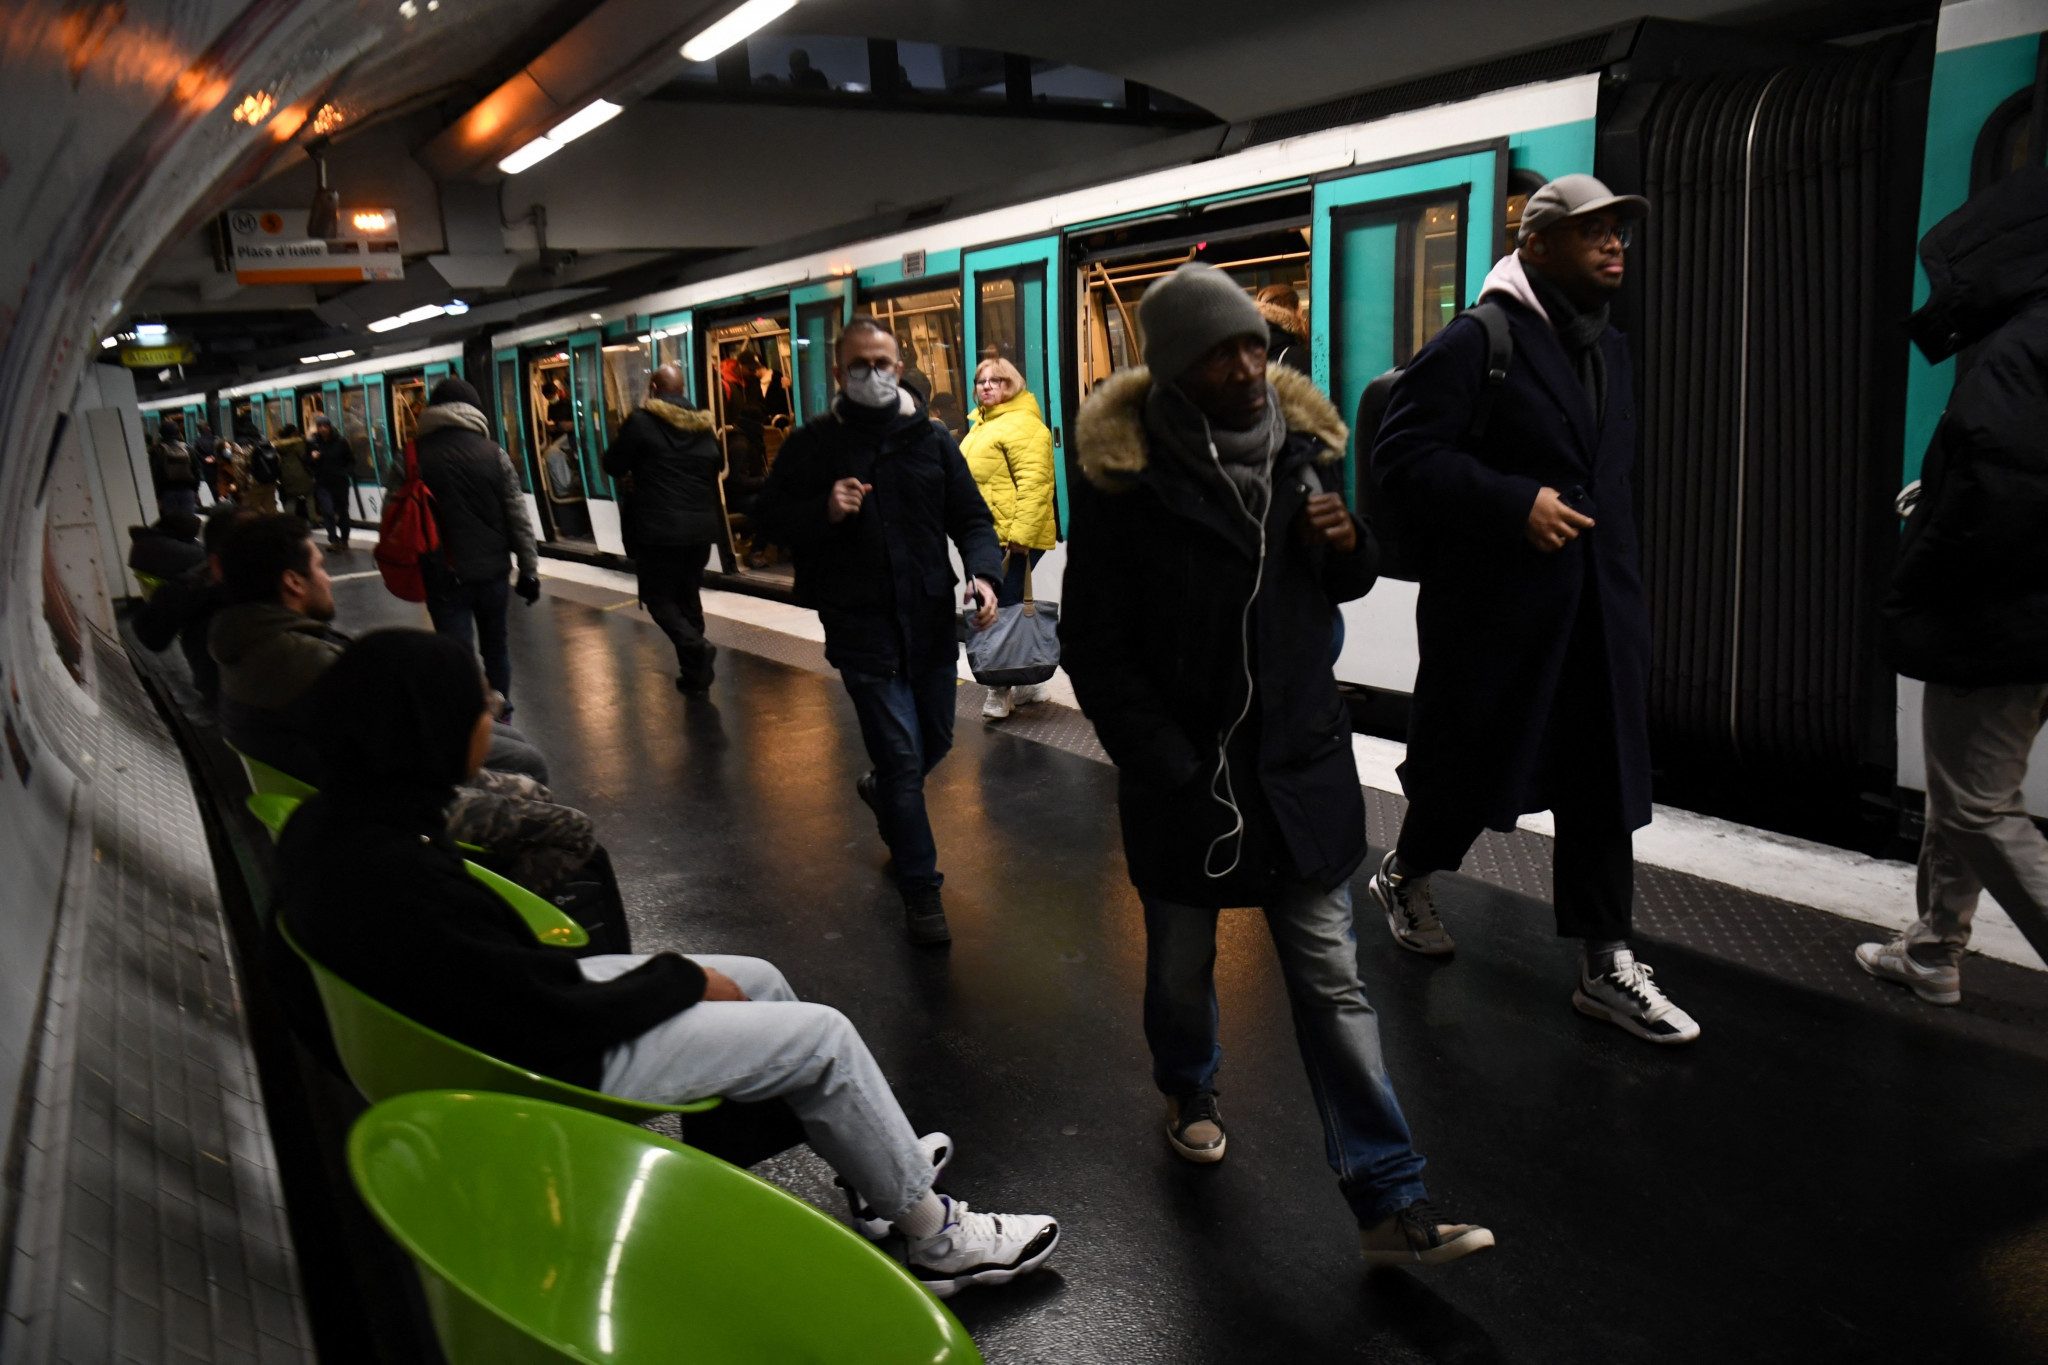 Paris transport operator aims to recruit 6,600 staff in preparation for Olympics